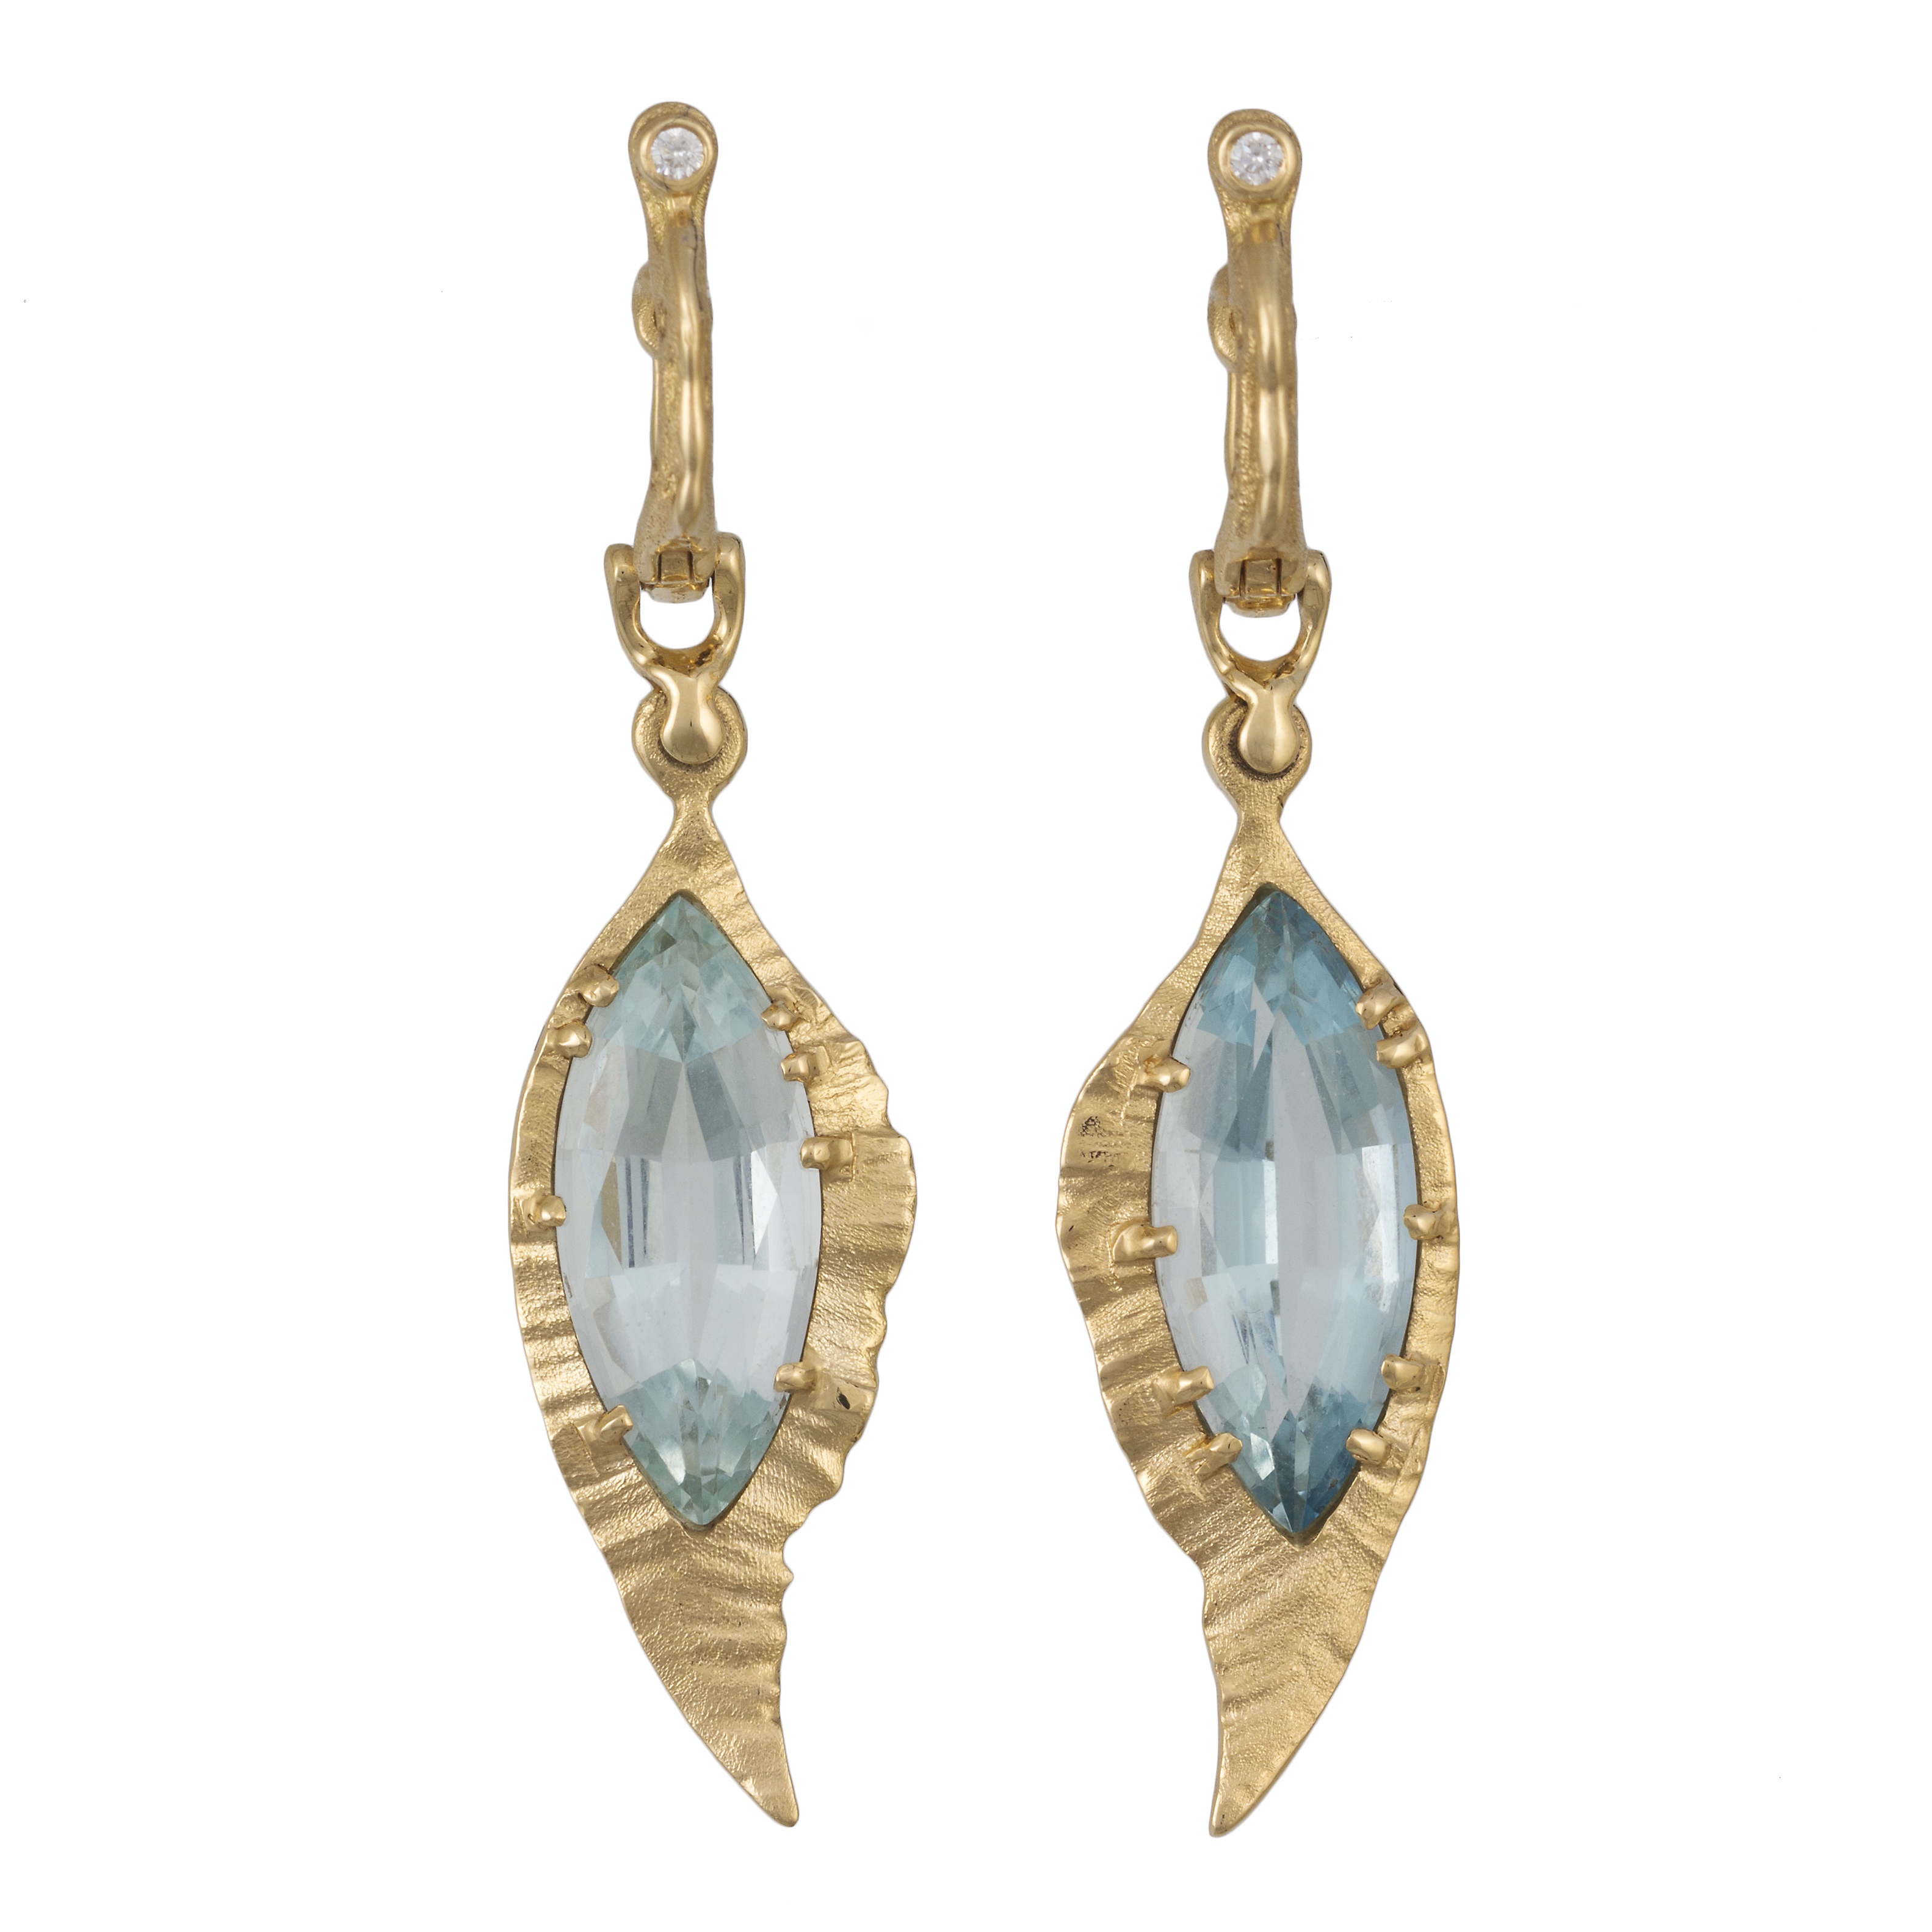 Feather earrings 1 by Audrius Krulis. 18k yellow gold, aquamarine and white diamonds